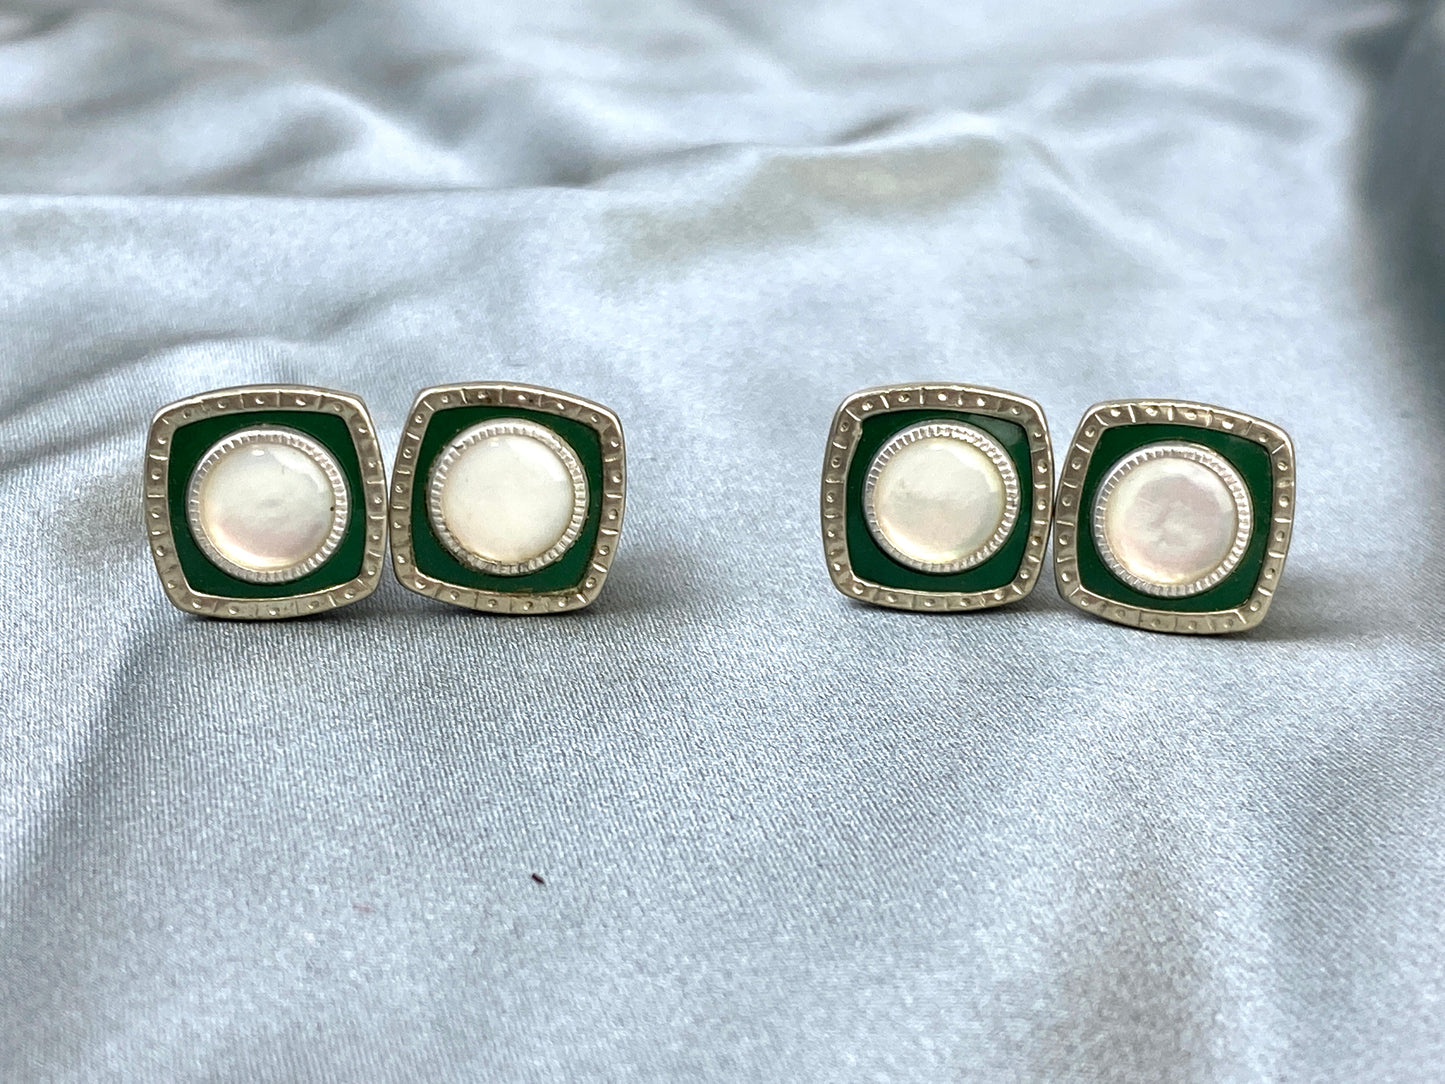 Vintage 1920s Art Deco Silver Square Cufflinks, Green Celluloid & Mother of Pearl, Snap Link